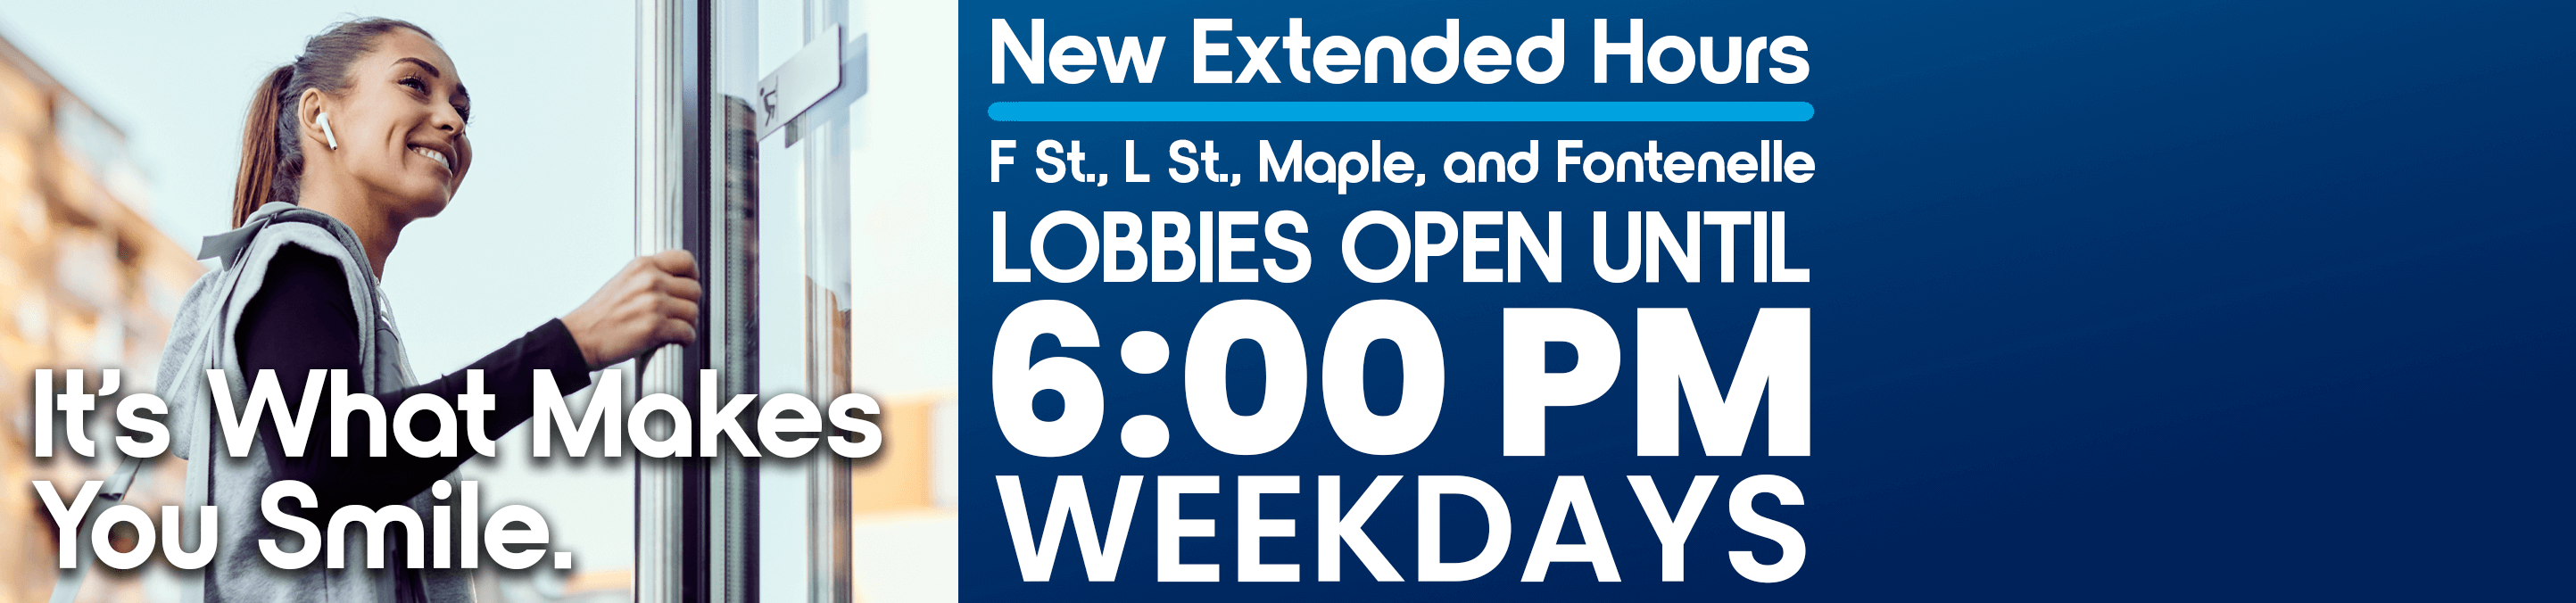 It's What Makes You Smile. New Extended Hours. F St., L St., Maple, and Fontenelle LOBBIES OPEN UNTIL 6:00 PM WEEKDAYS